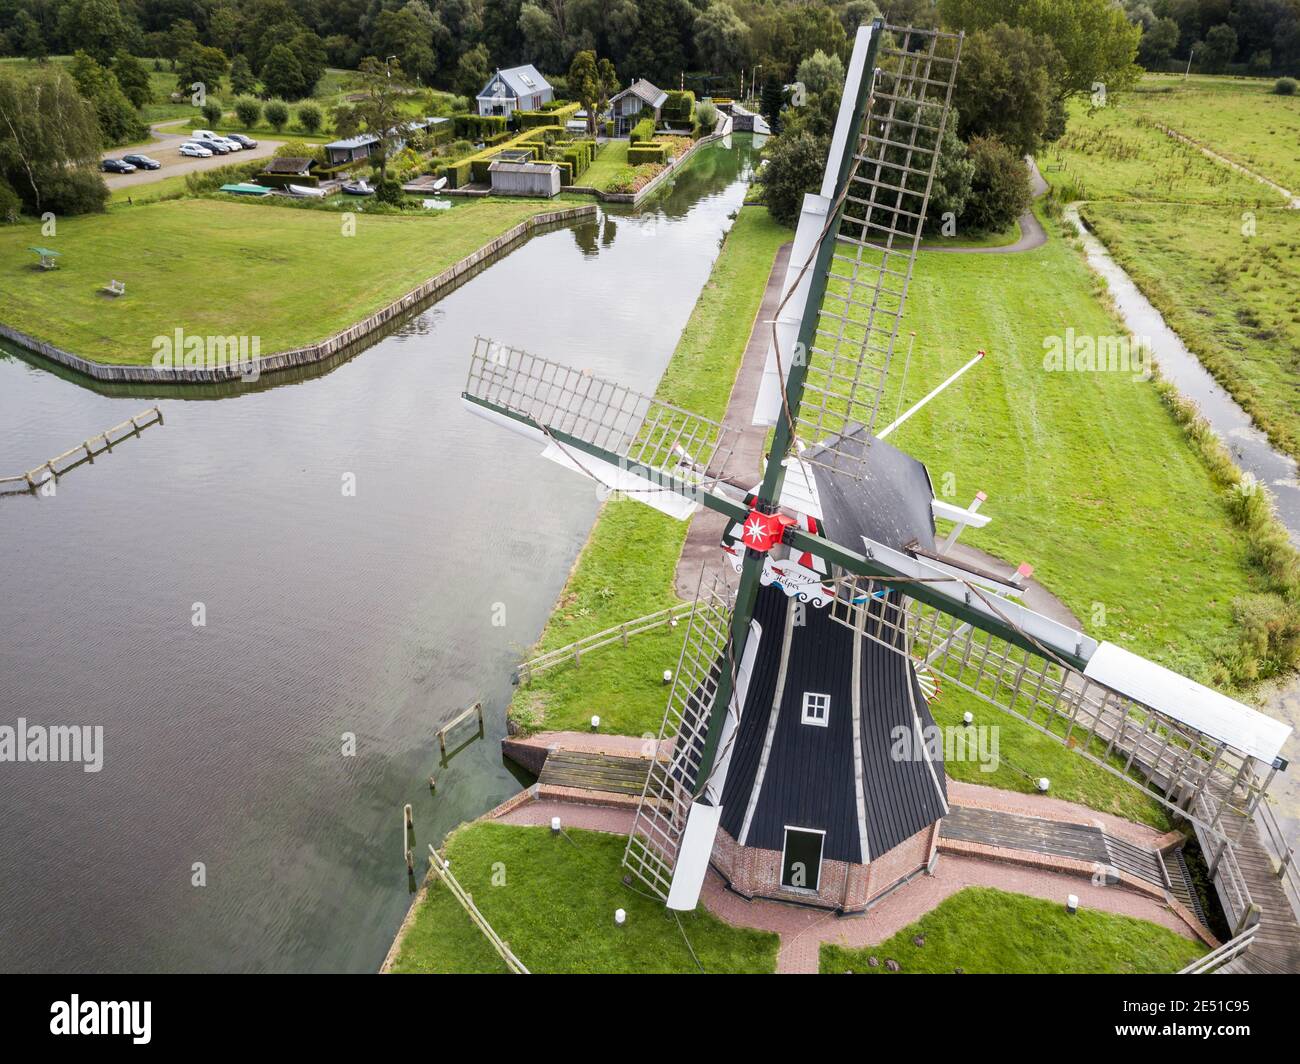 Aerial wide angle view of a dutch landscape, with meadows, canals and an ancient black and white windmill in the foreground Stock Photo